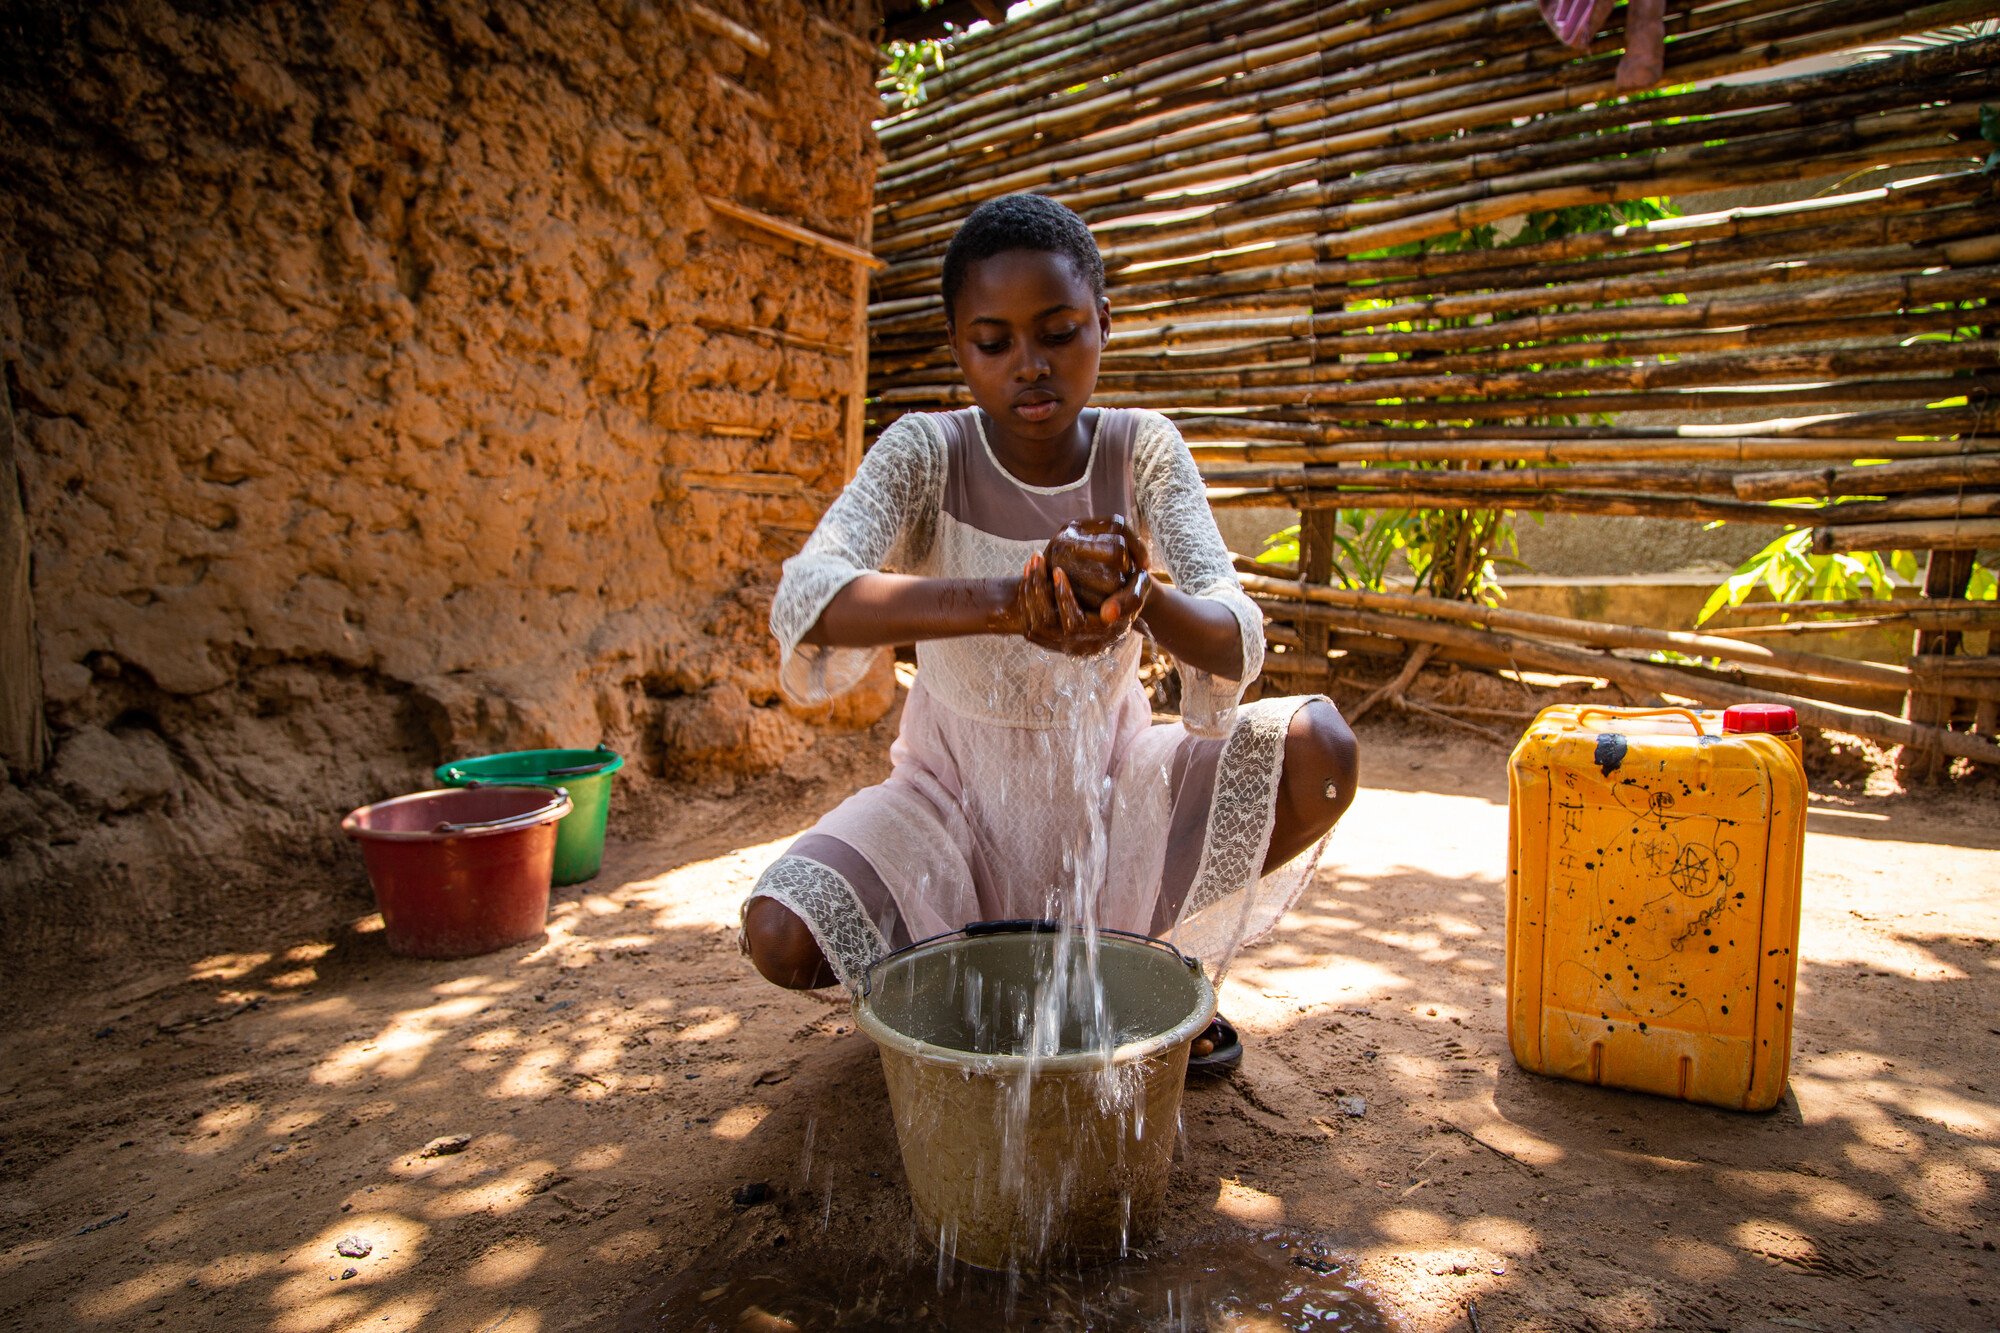 A girl in a white dress washes her hands in a bucket. She has a stream of water falling off her hands.